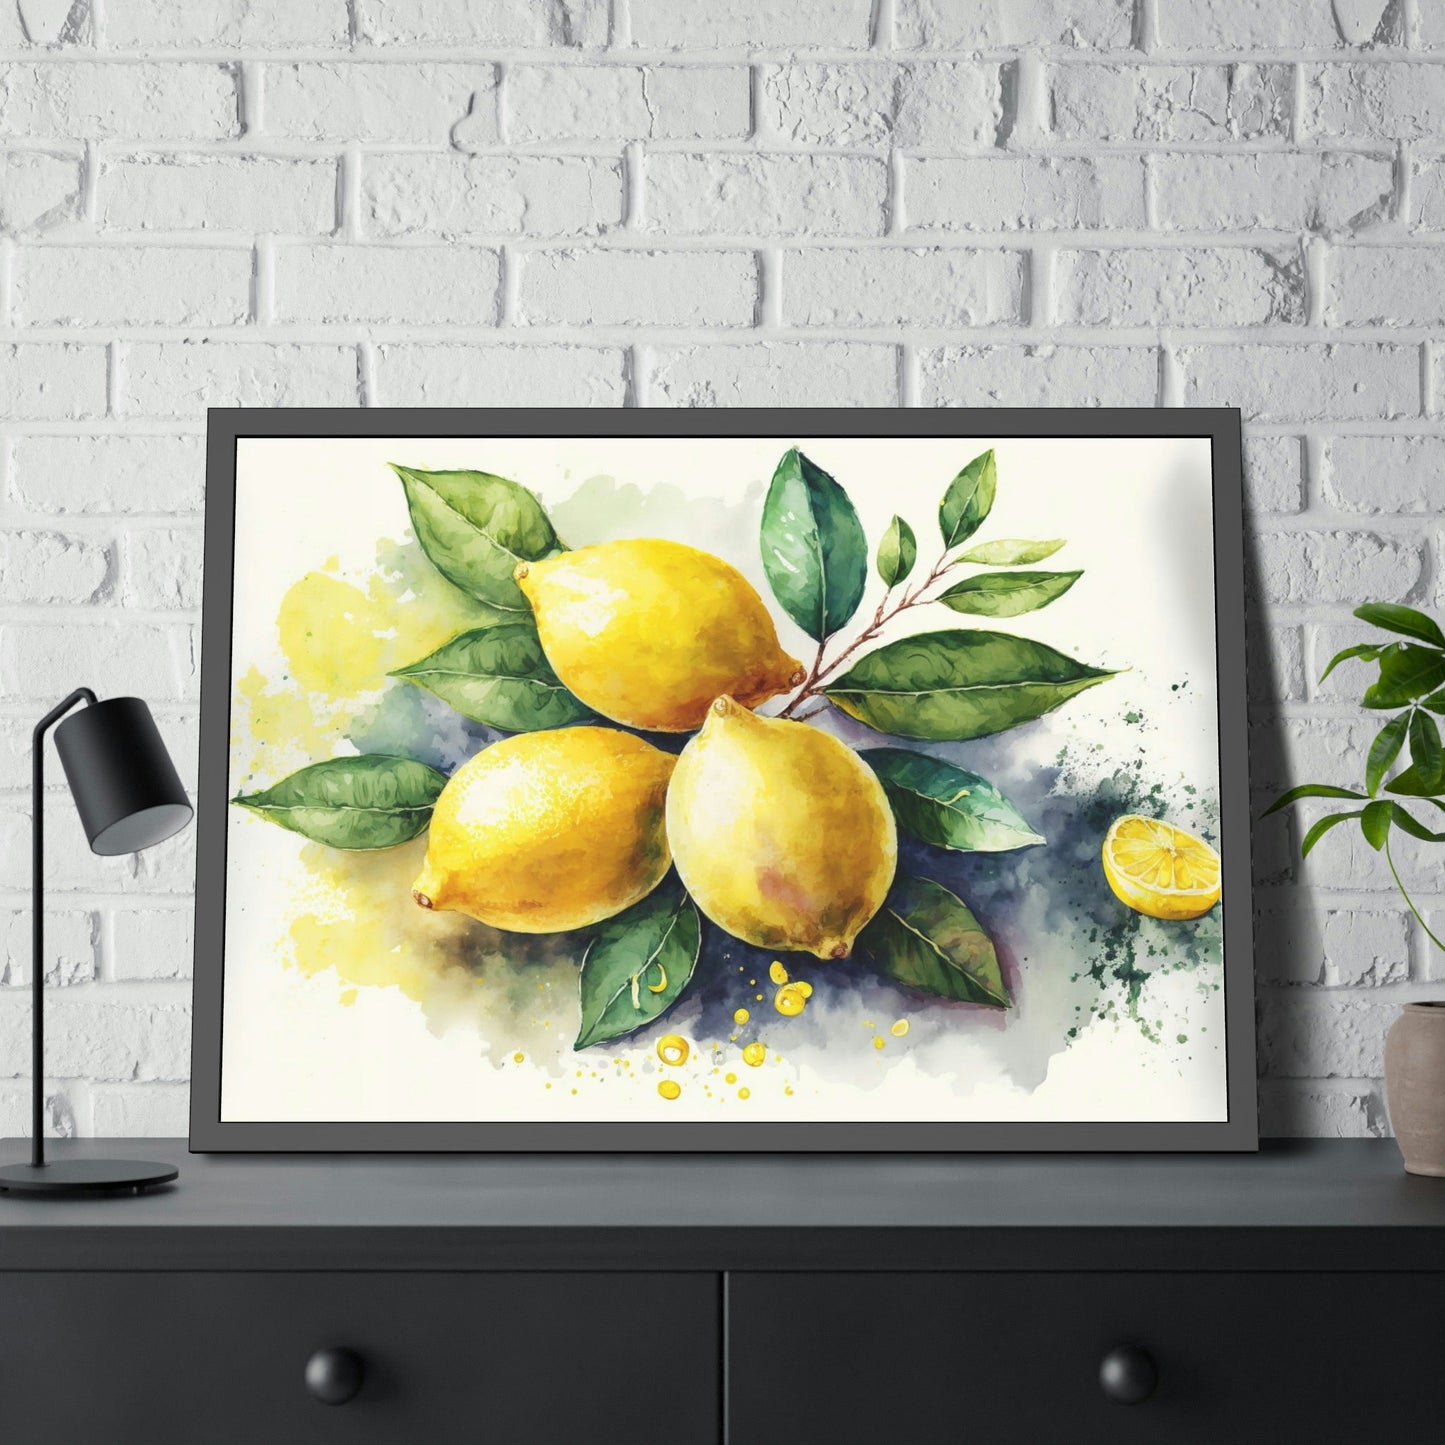 Yellow Zest: Refreshing and Invigorating Canvas Art Prints and Framed Posters Featuring Yellow Lemons